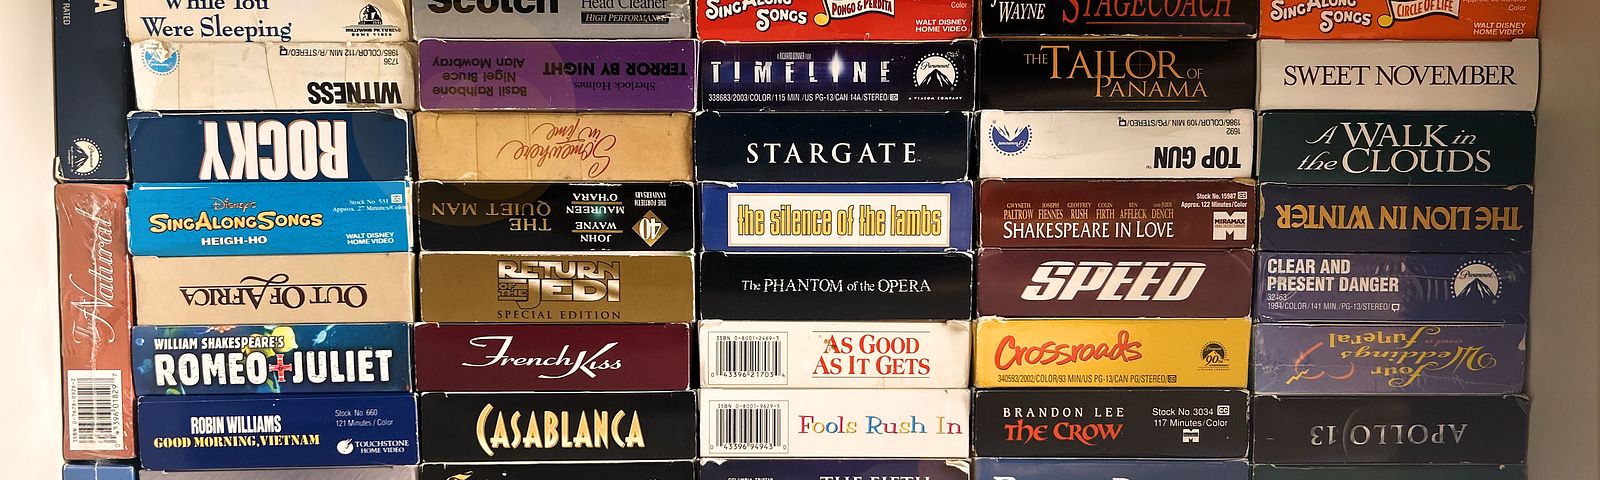 A full bookshelf of VHS tapes of classic movies.